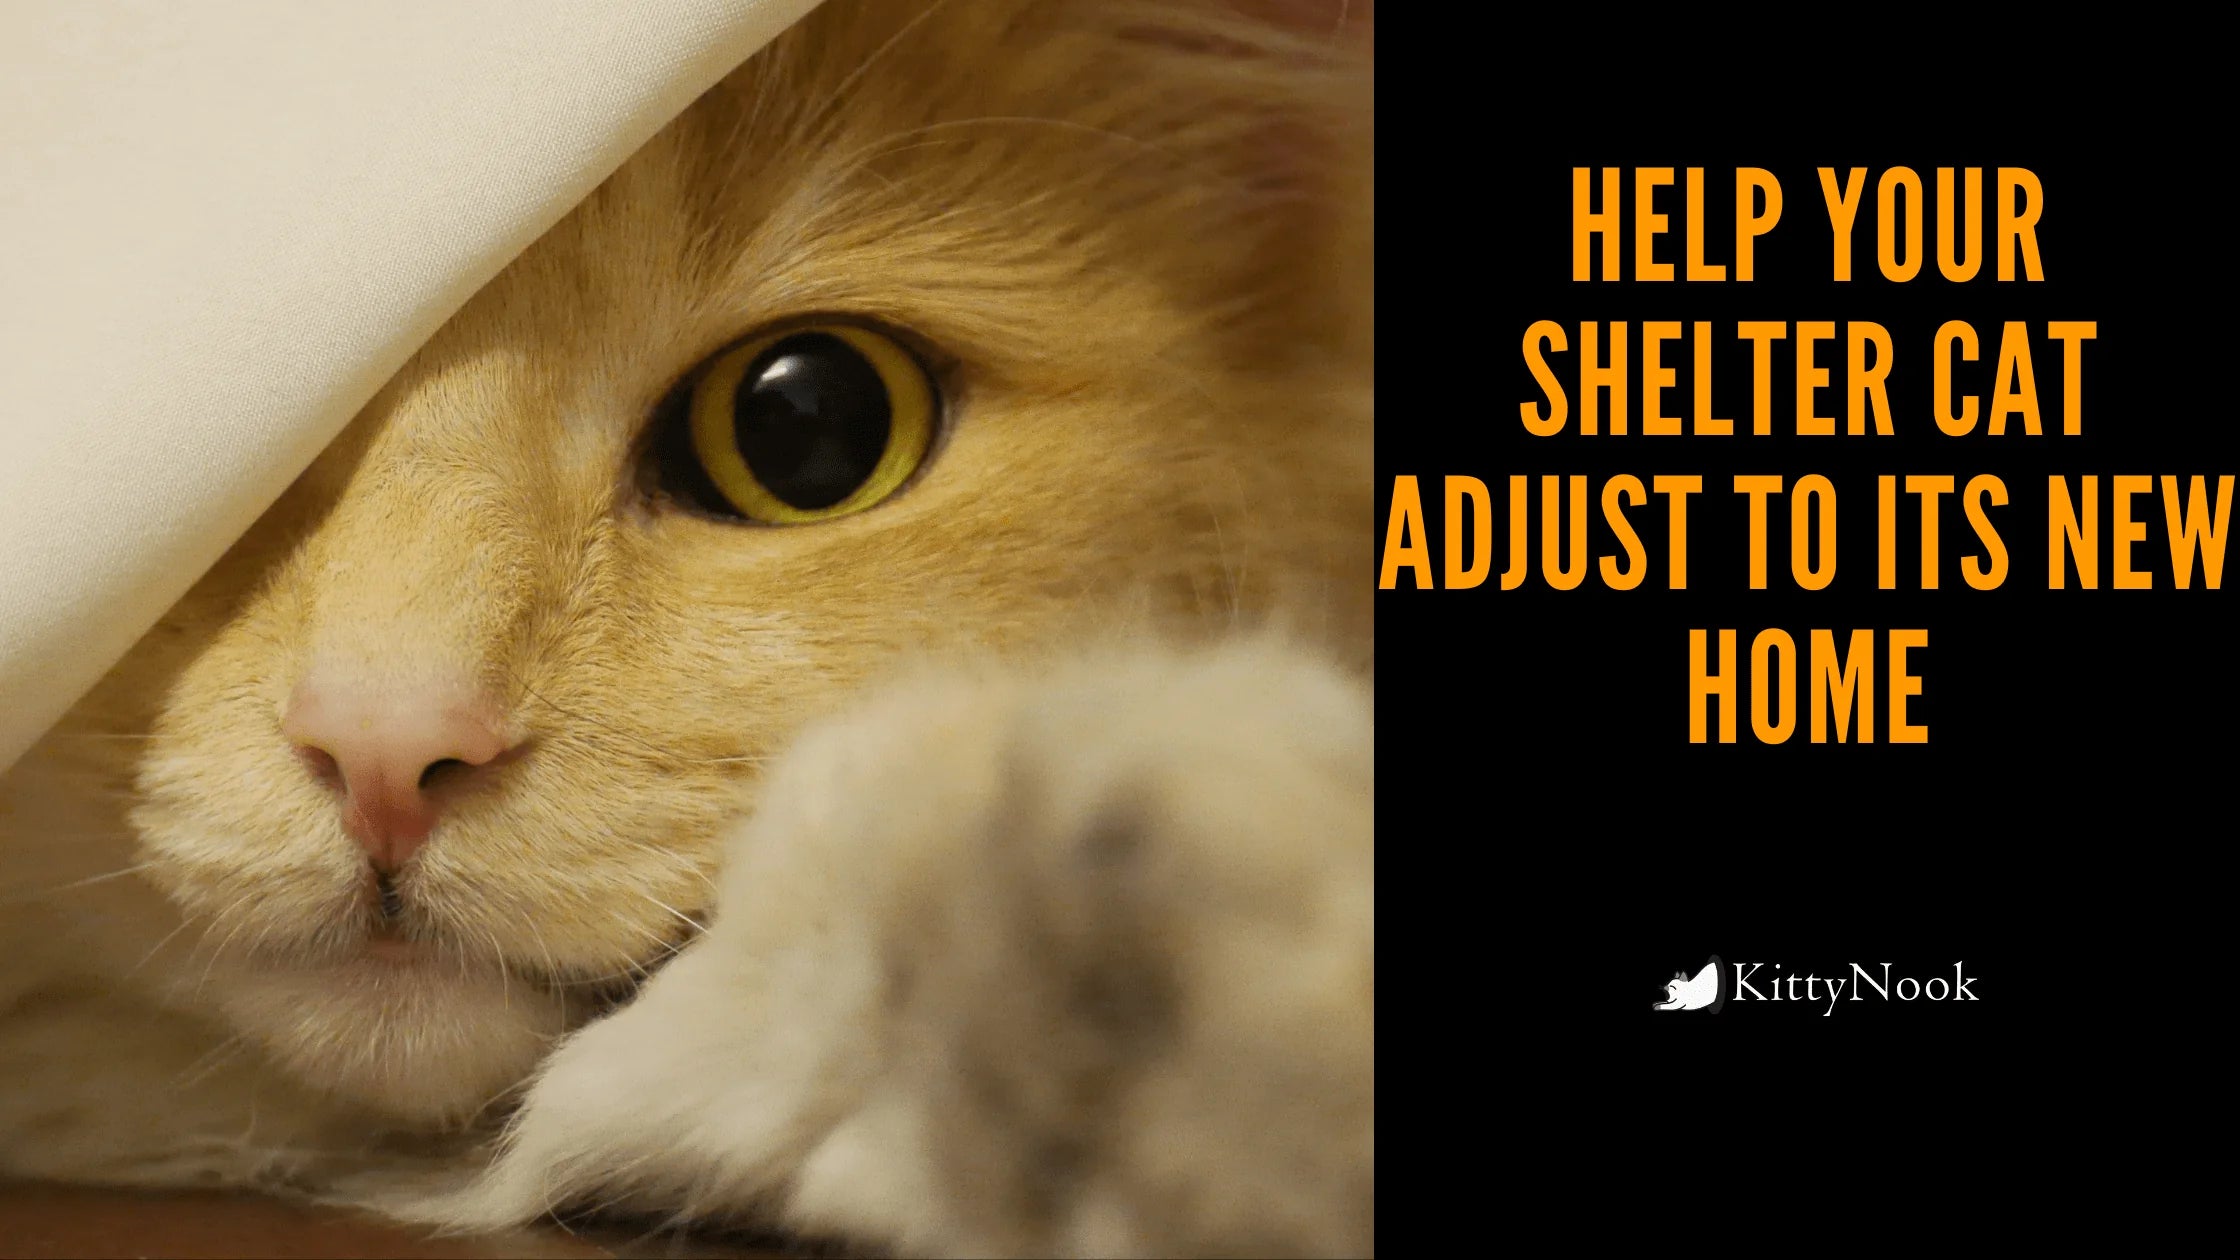 Help Your Shelter Cat Adjust To Its New Home - KittyNook Cat Company